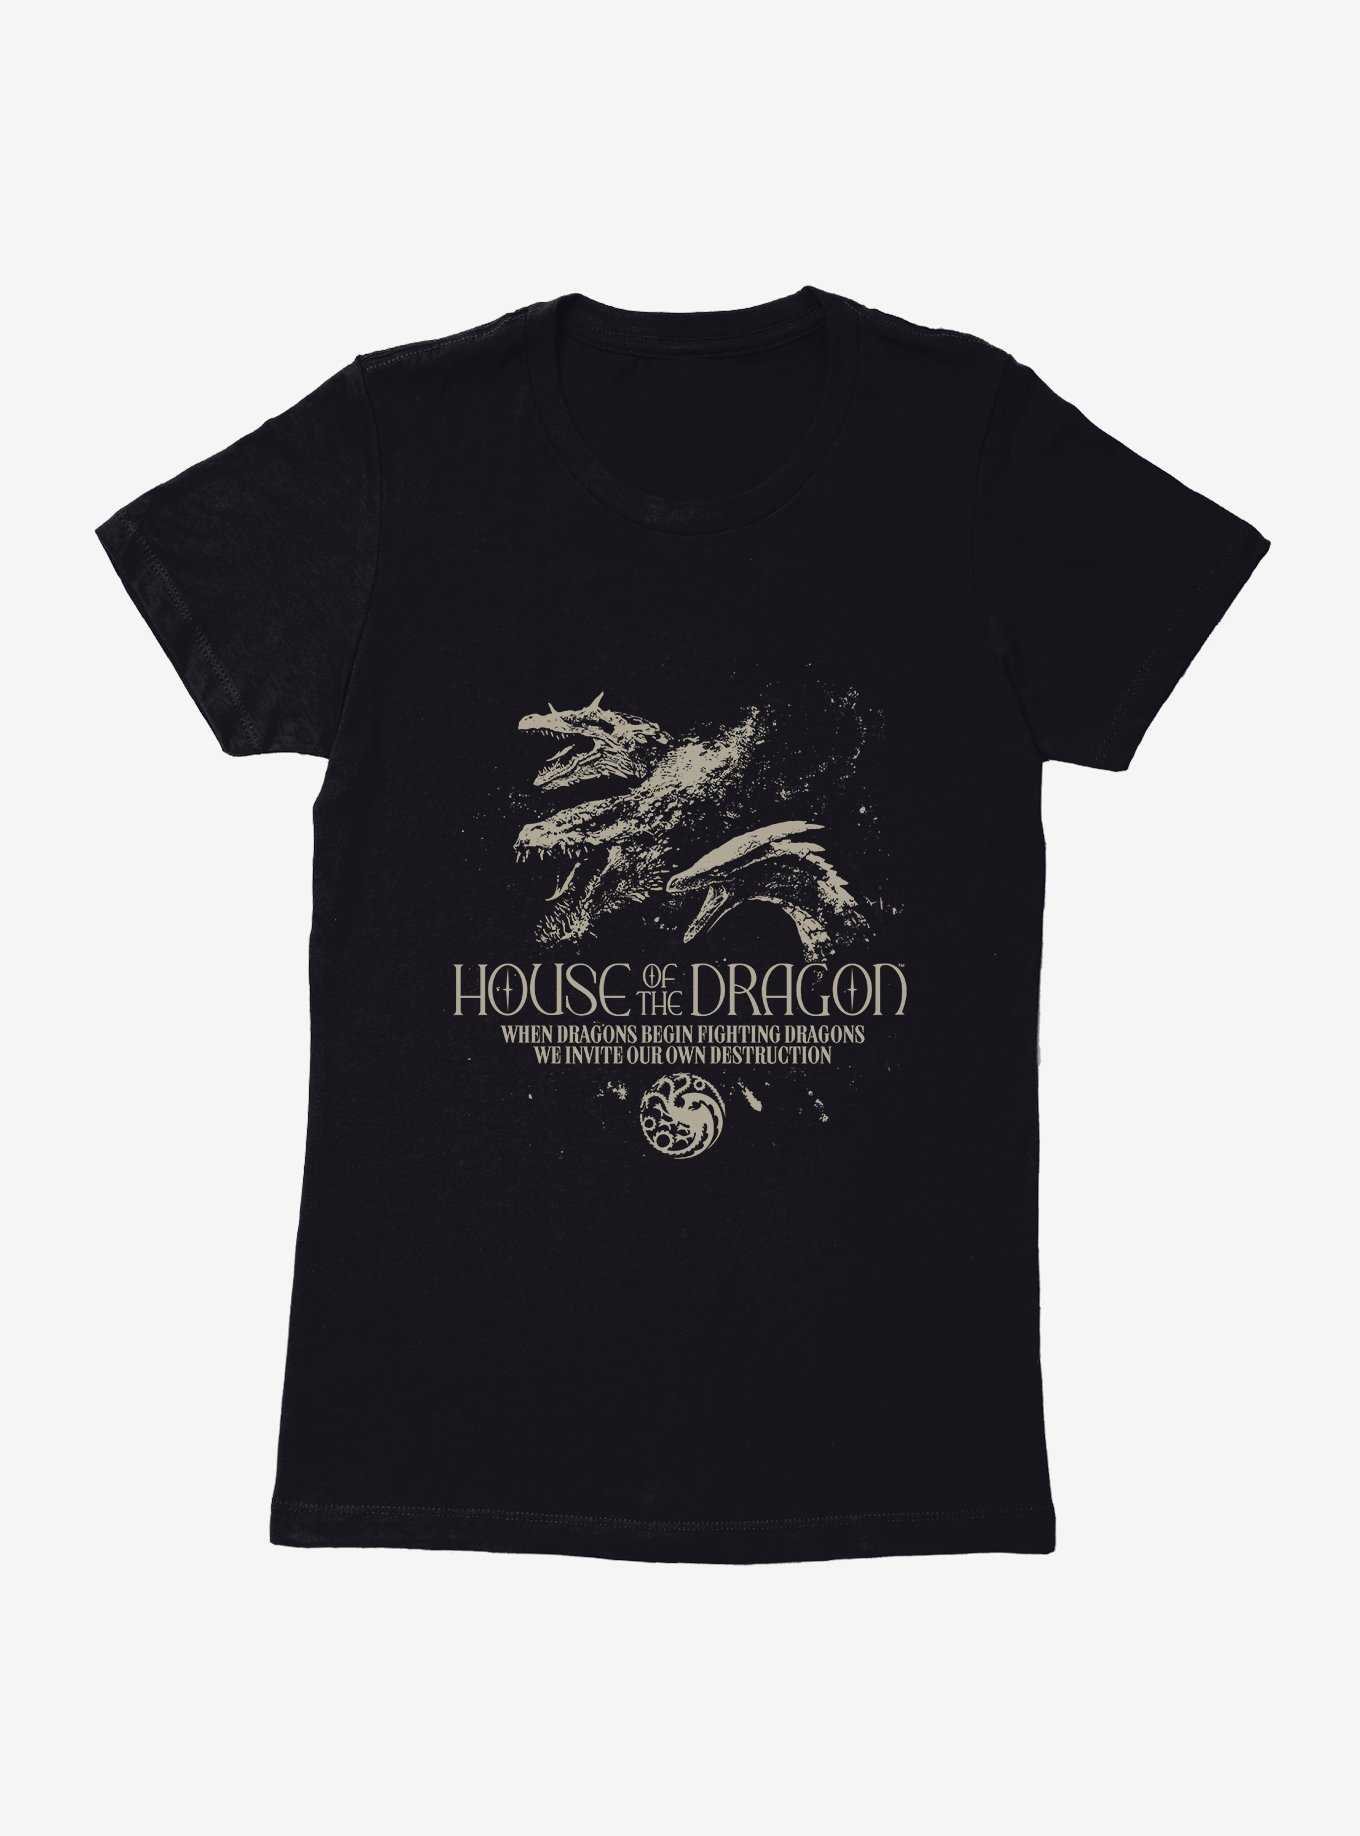 House Of The Dragon Invite Our Own Destruction Womens T-Shirt, , hi-res